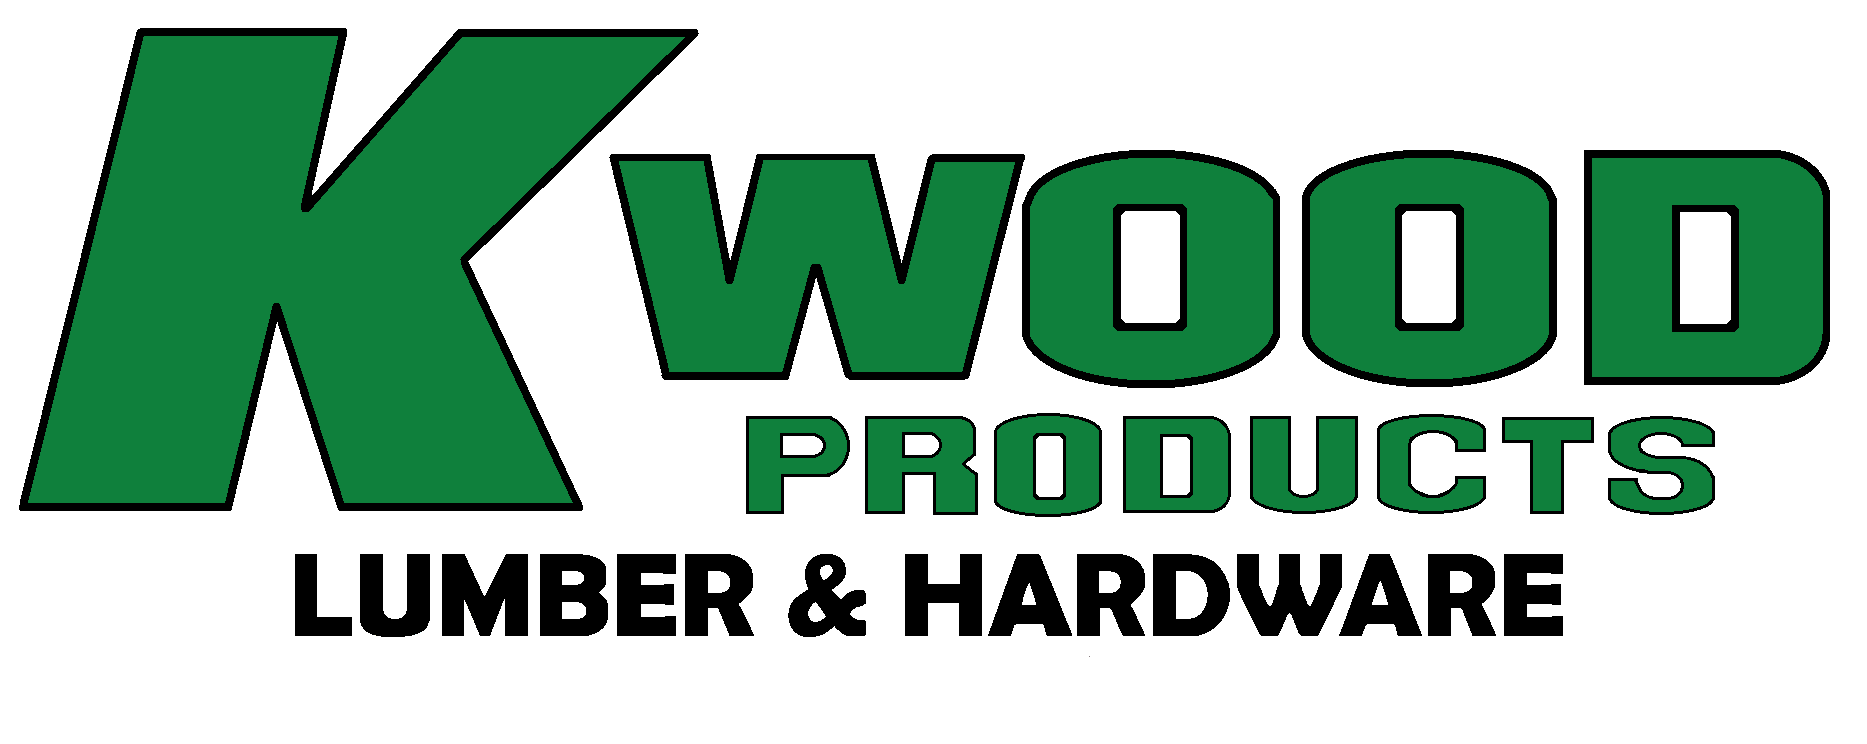 K-Wood Products Lumber, Hardware, & Building Materials - South Bend, Indiana